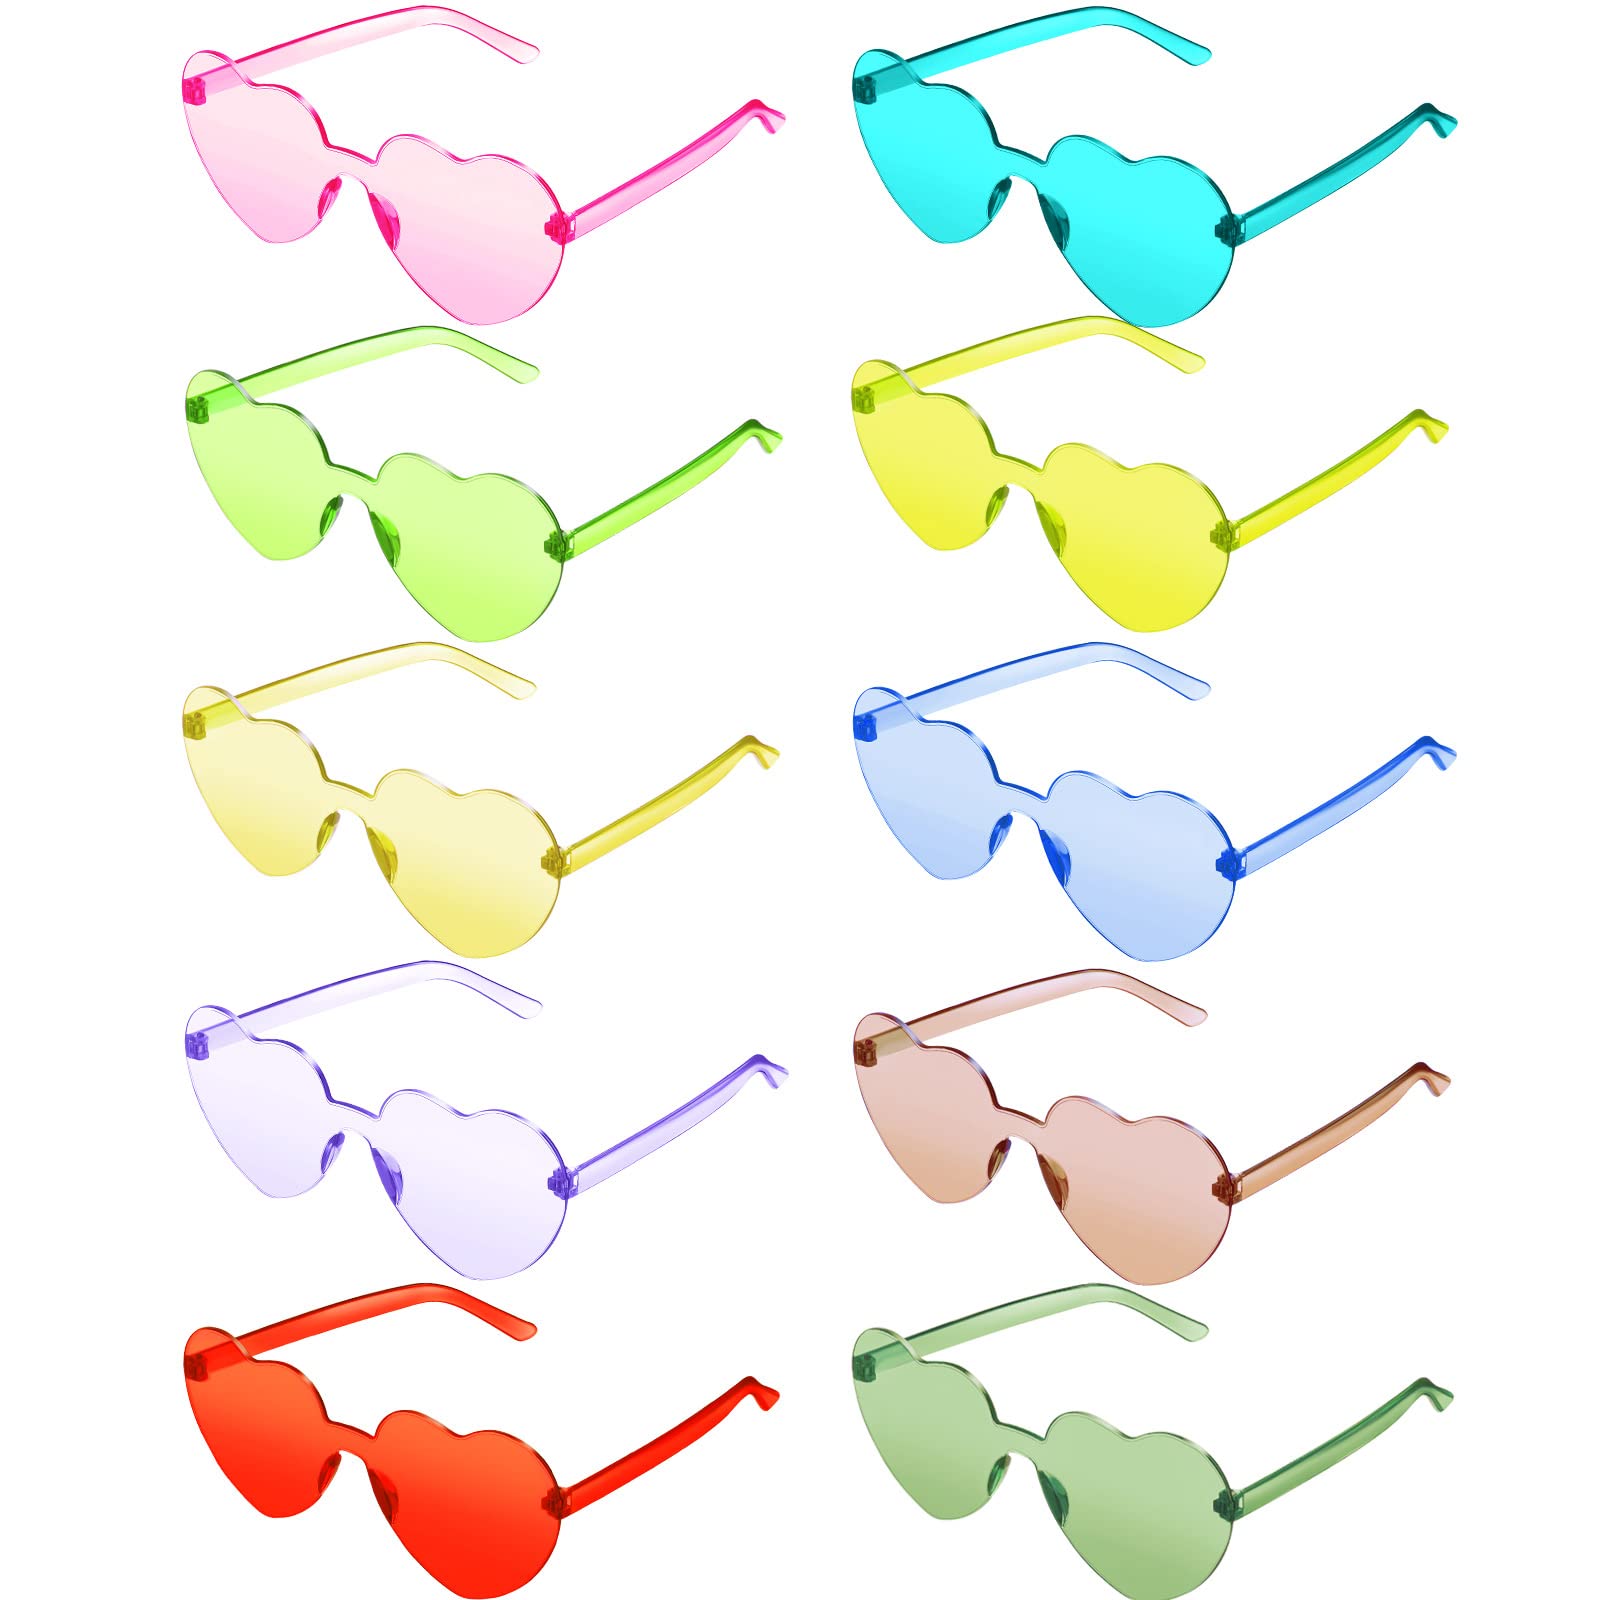 Toodoo 10 Pairs Heart Shaped Sunglasses Rainbow Sunglasses Candy Color Rimless Glasses For Women Girl Party Favor(Green, Blue, Y